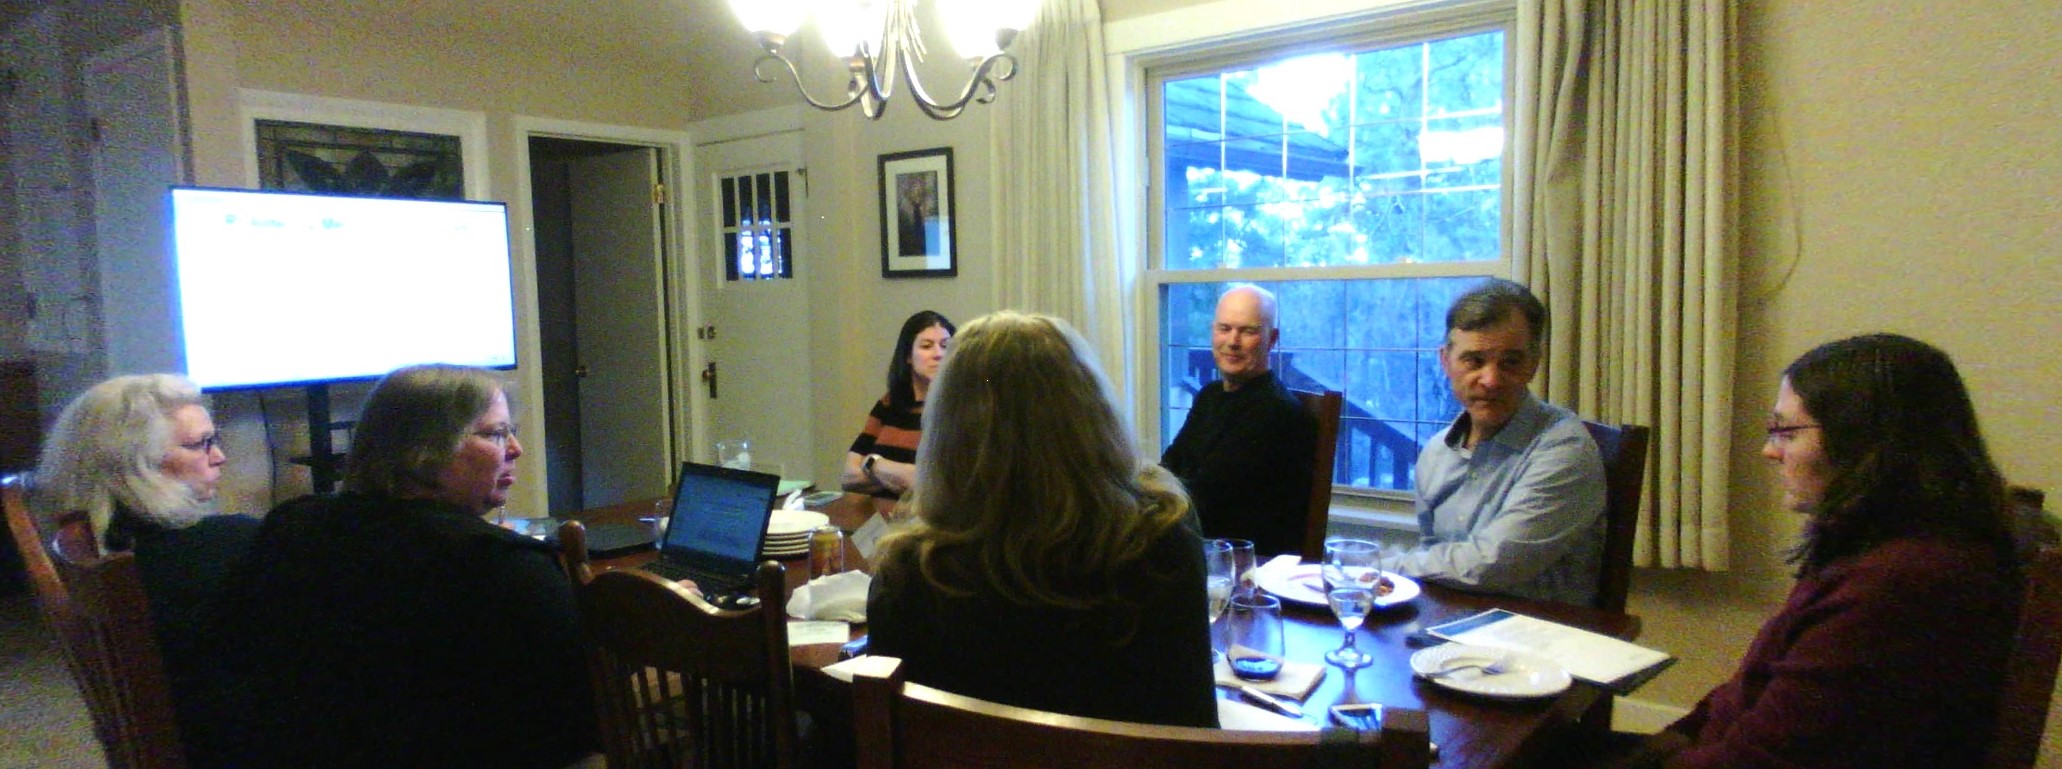 Seven people sitting around a table speaking and listening while a slideshow is playing on a large monitor in the background.